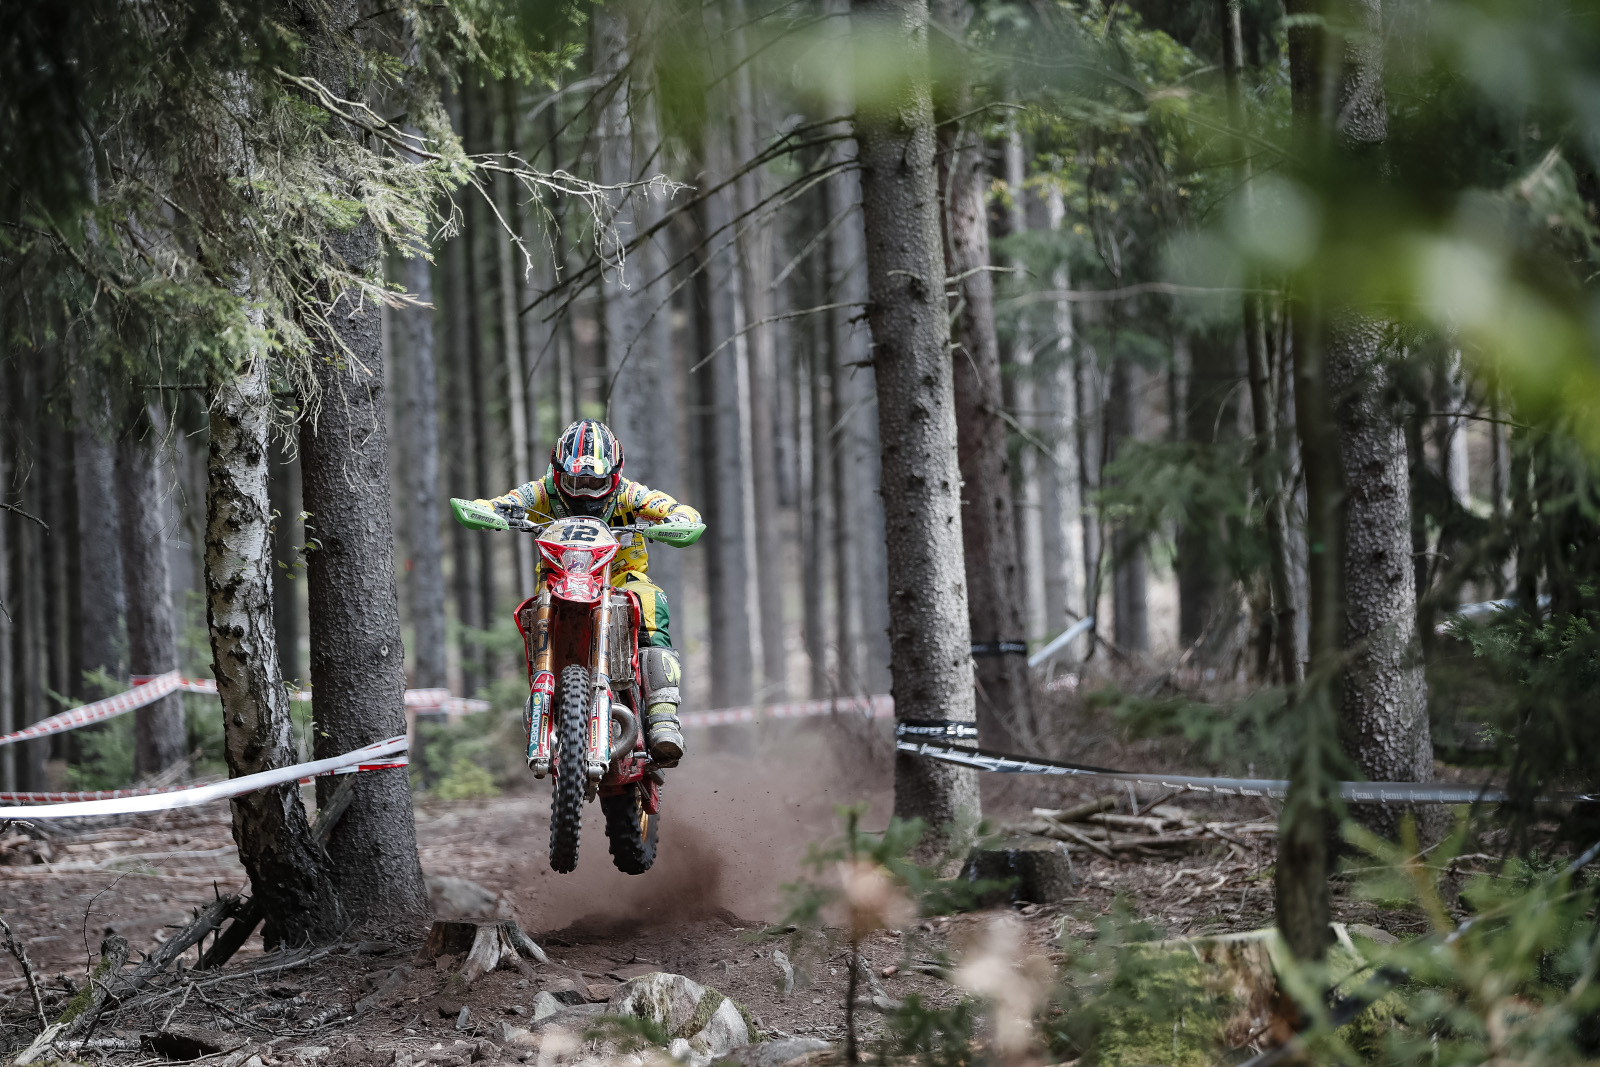 Results feed: French EnduroGP day 1 – Freeman edges towards 2019 World title